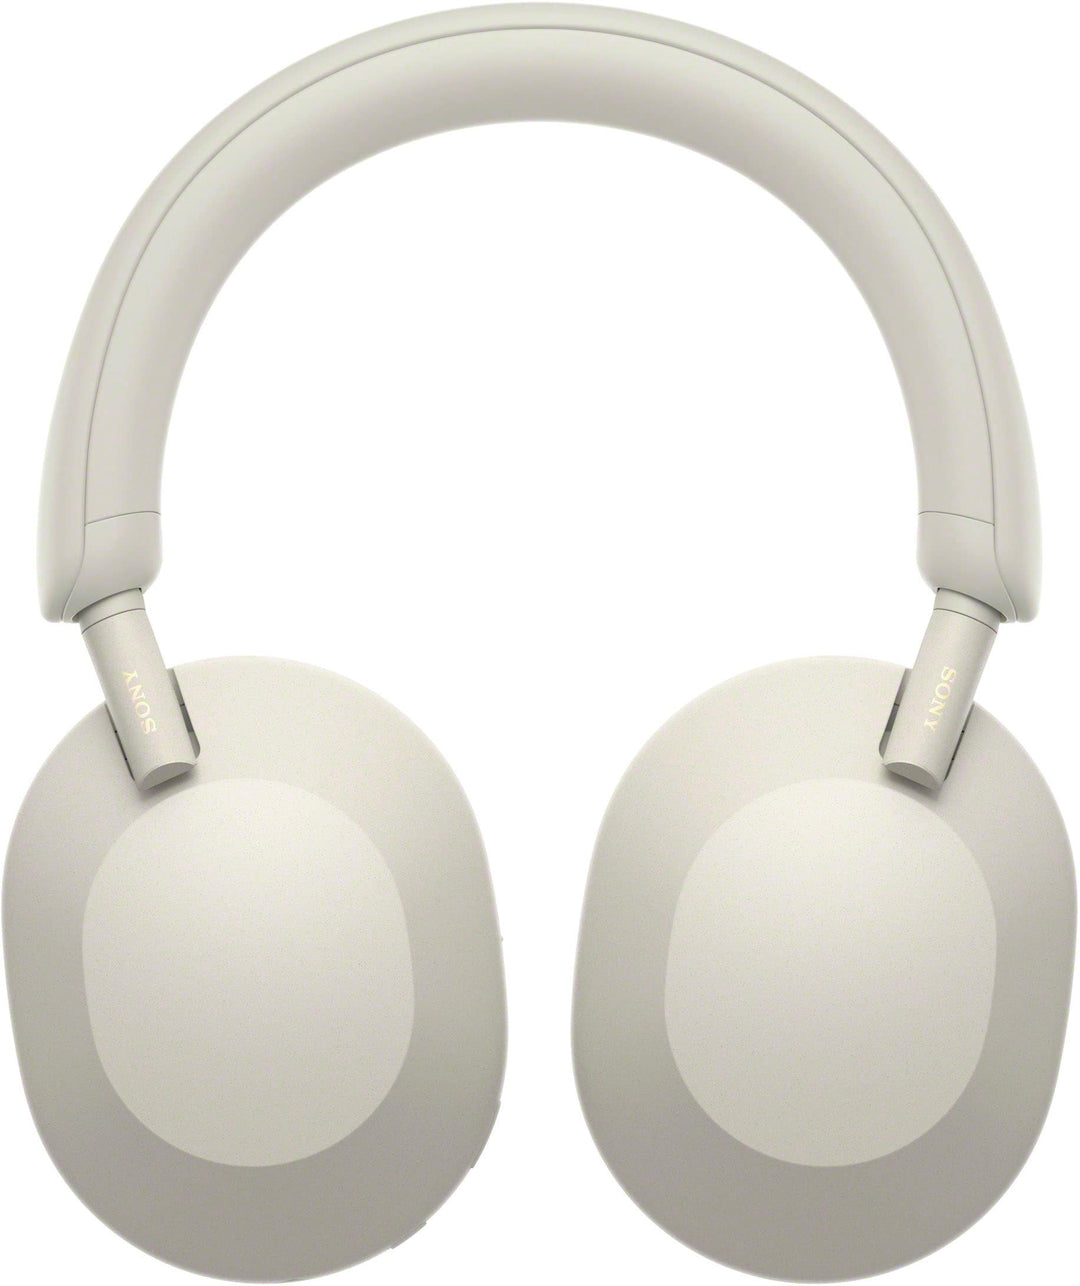 Sony - WH-1000XM5 Wireless Noise-Canceling Over-the-Ear Headphones - Silver_7